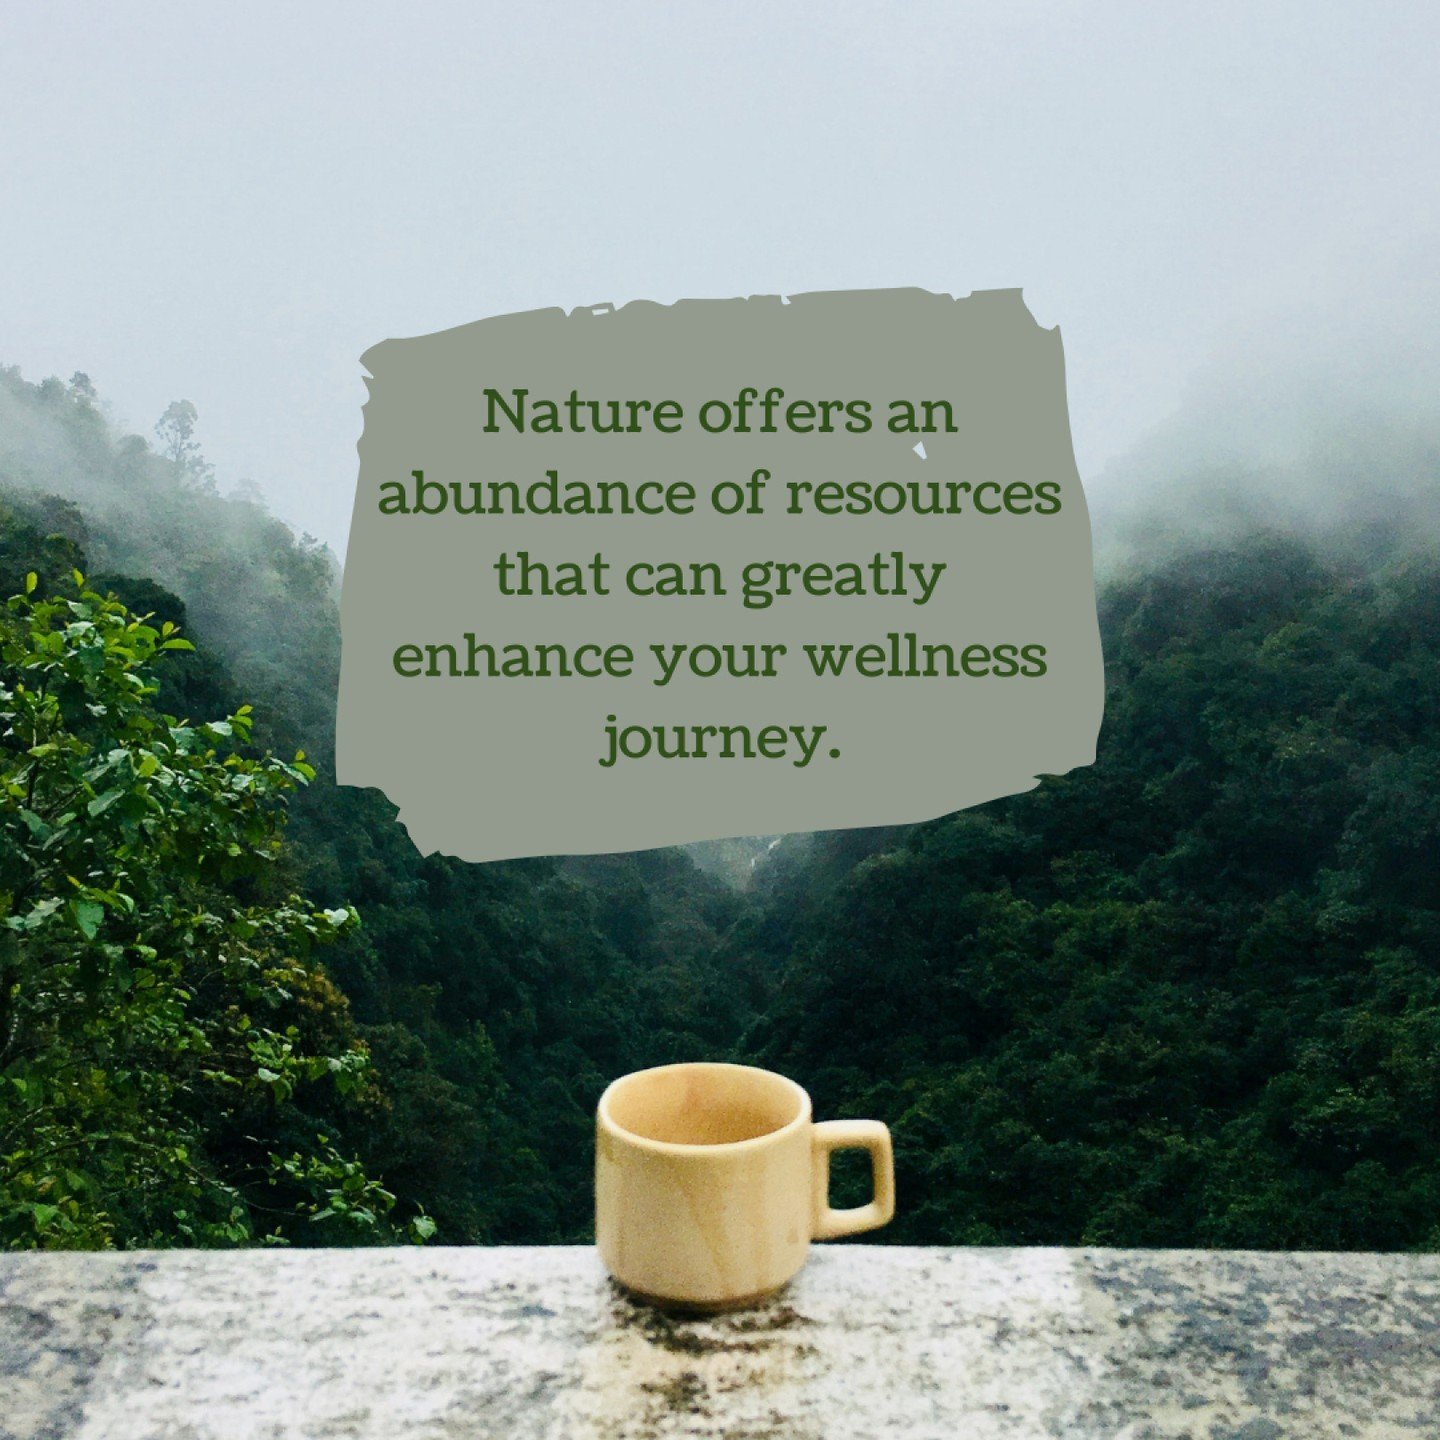 Nature offers an abundance of resources that can greatly enhance your wellness journey. 

Here's how you can utilize water, sunshine, and earthing to nourish your body and rejuvenate your mind:

Water: Incorporating water into your wellness routine i